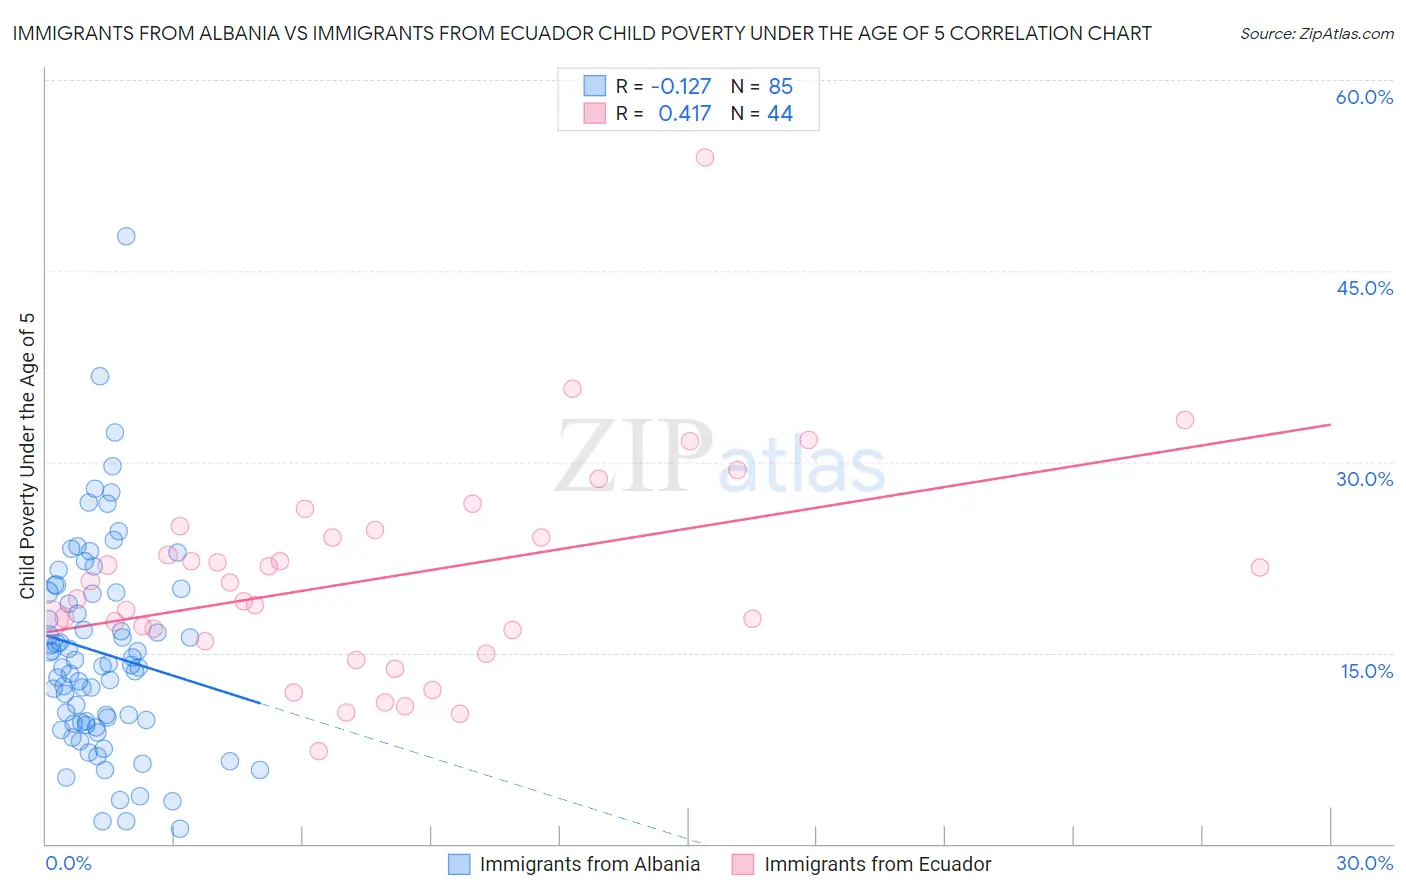 Immigrants from Albania vs Immigrants from Ecuador Child Poverty Under the Age of 5